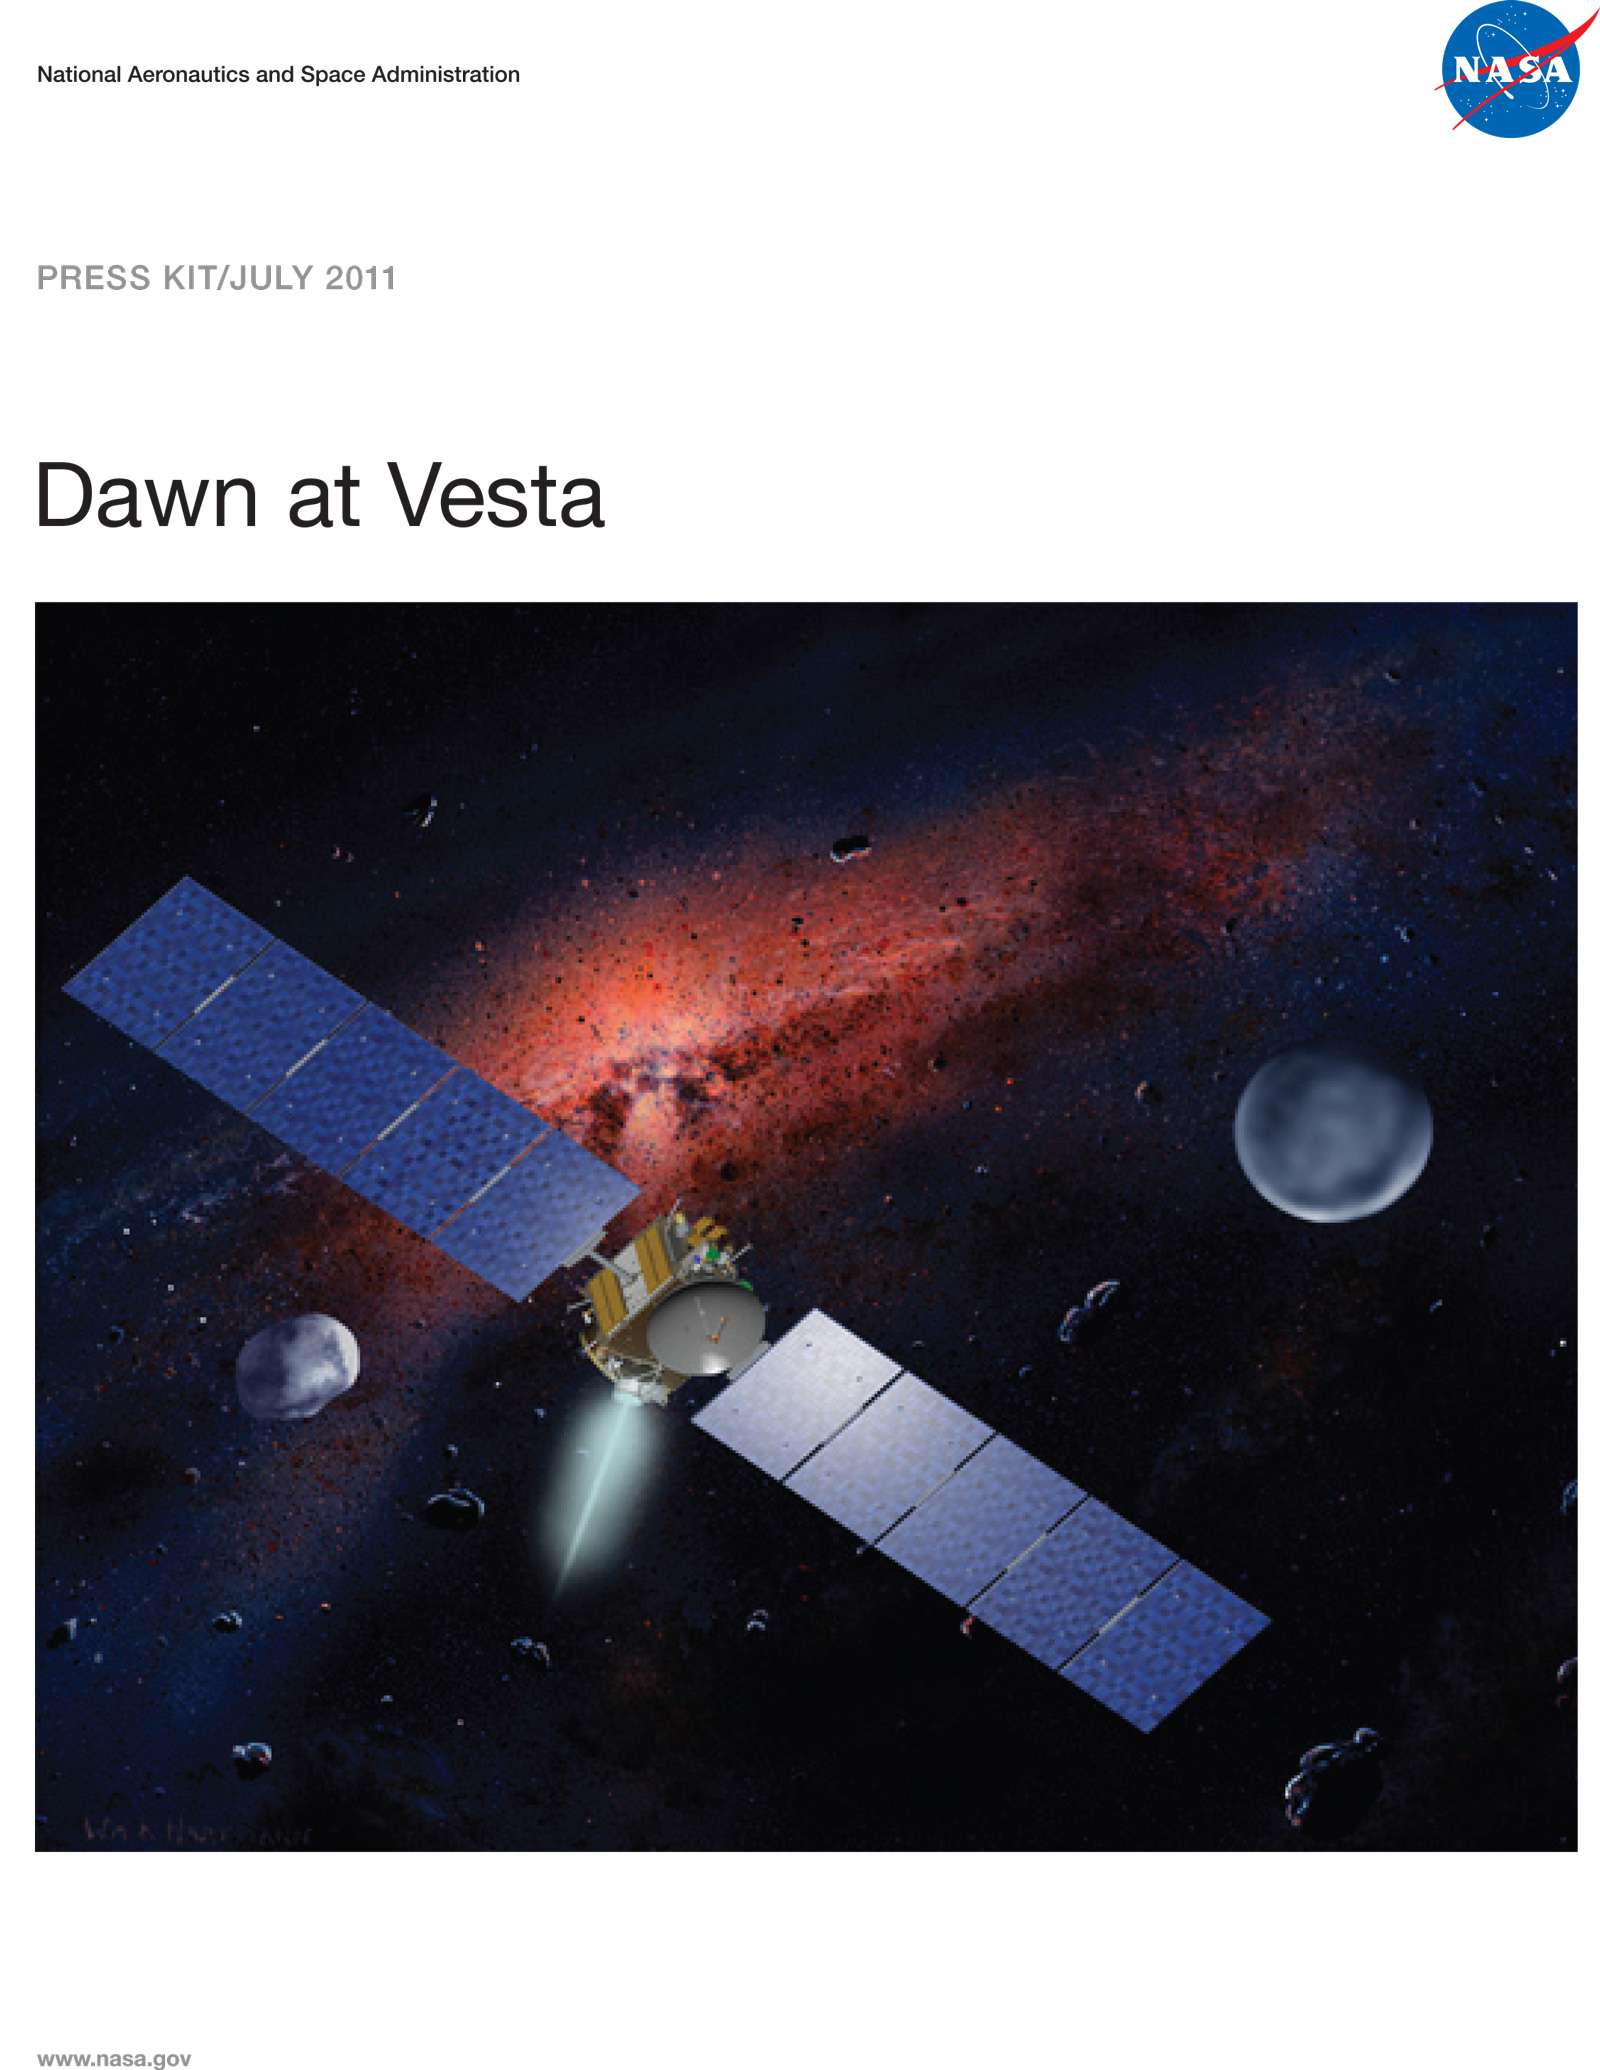 Facts about the Dawn mission.